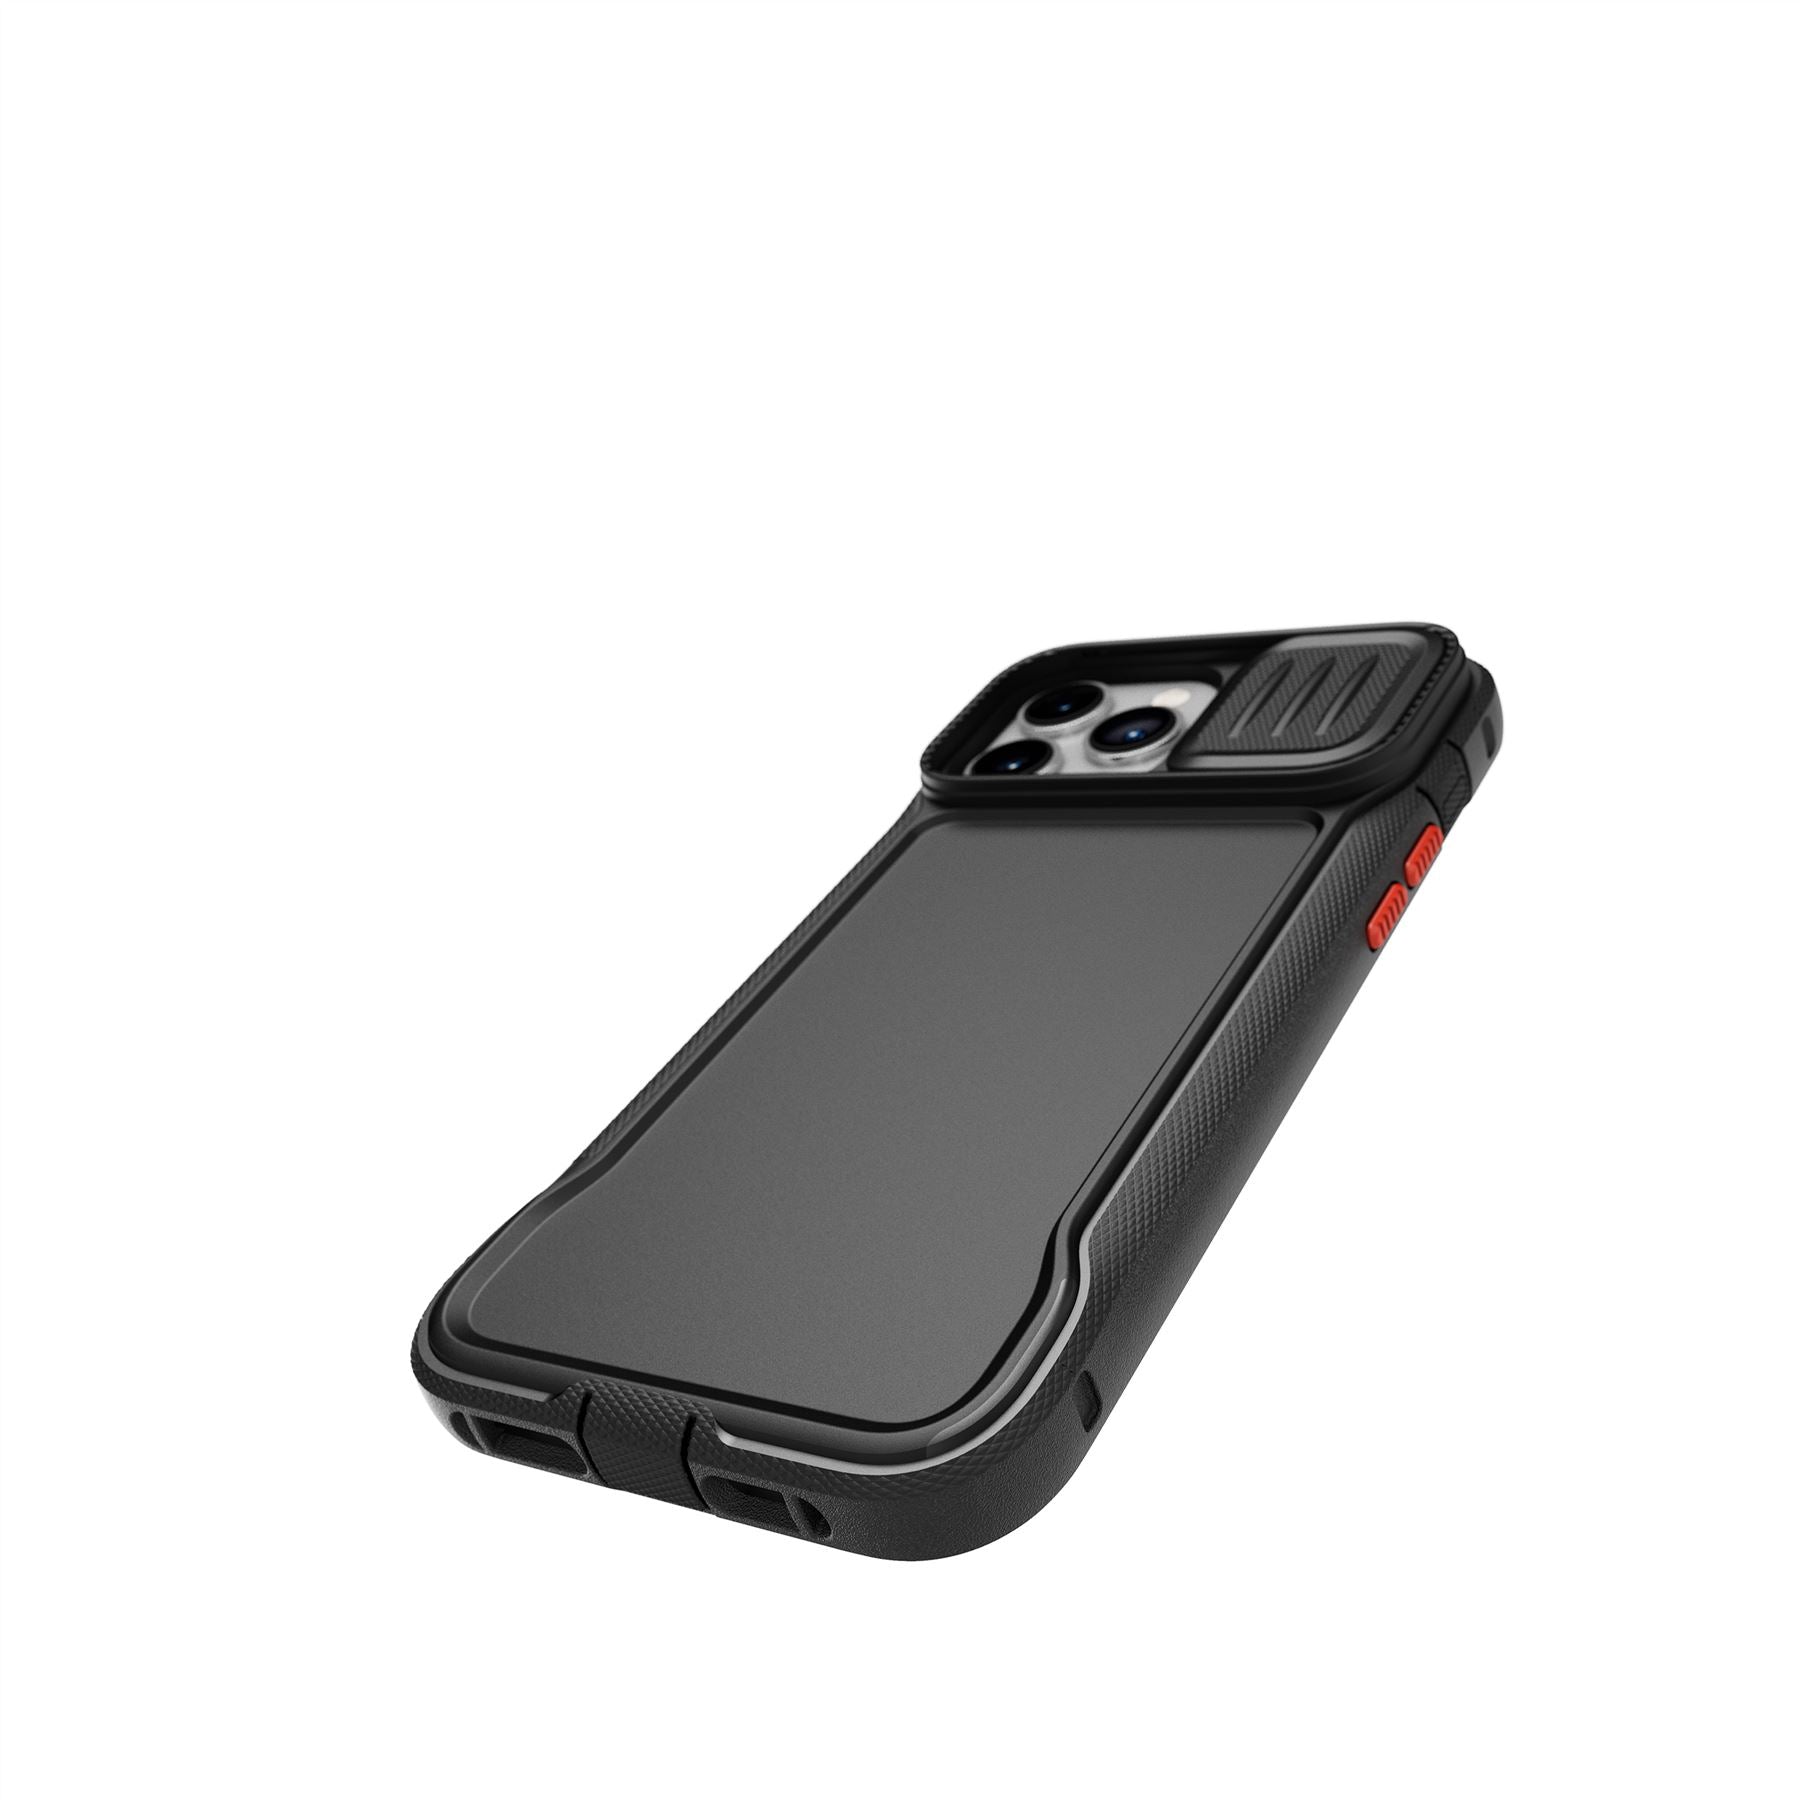 Tech21 EvoMax Off Black Case with Holster - for iPhone 13 Pro Max